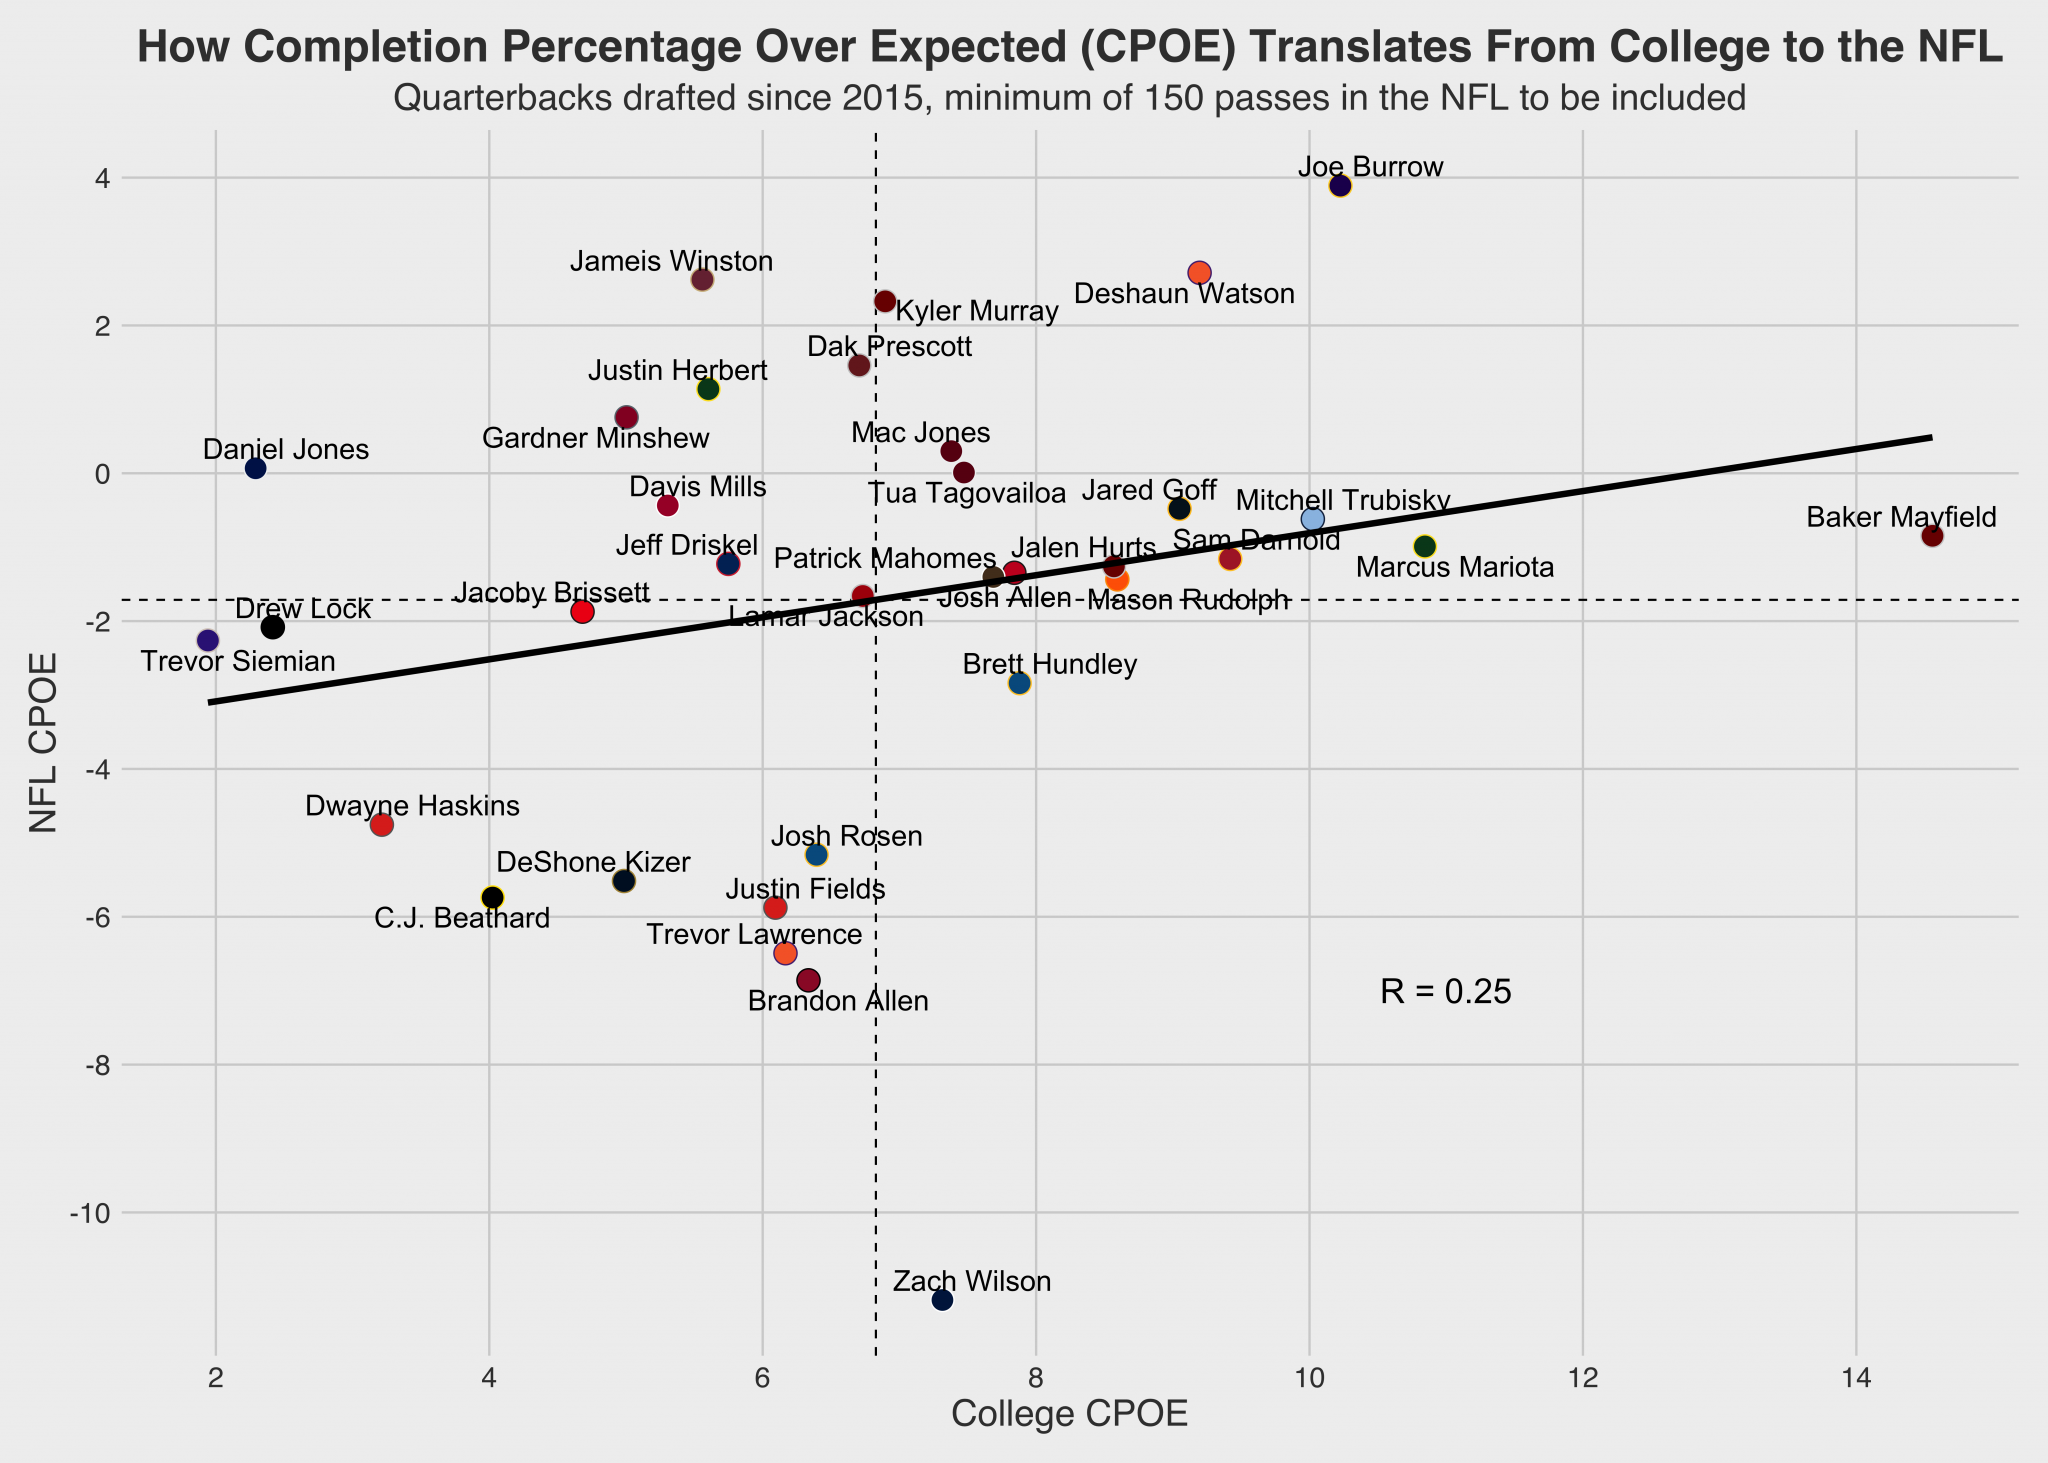 What college completion percentage over expected (CPOE) tells us about